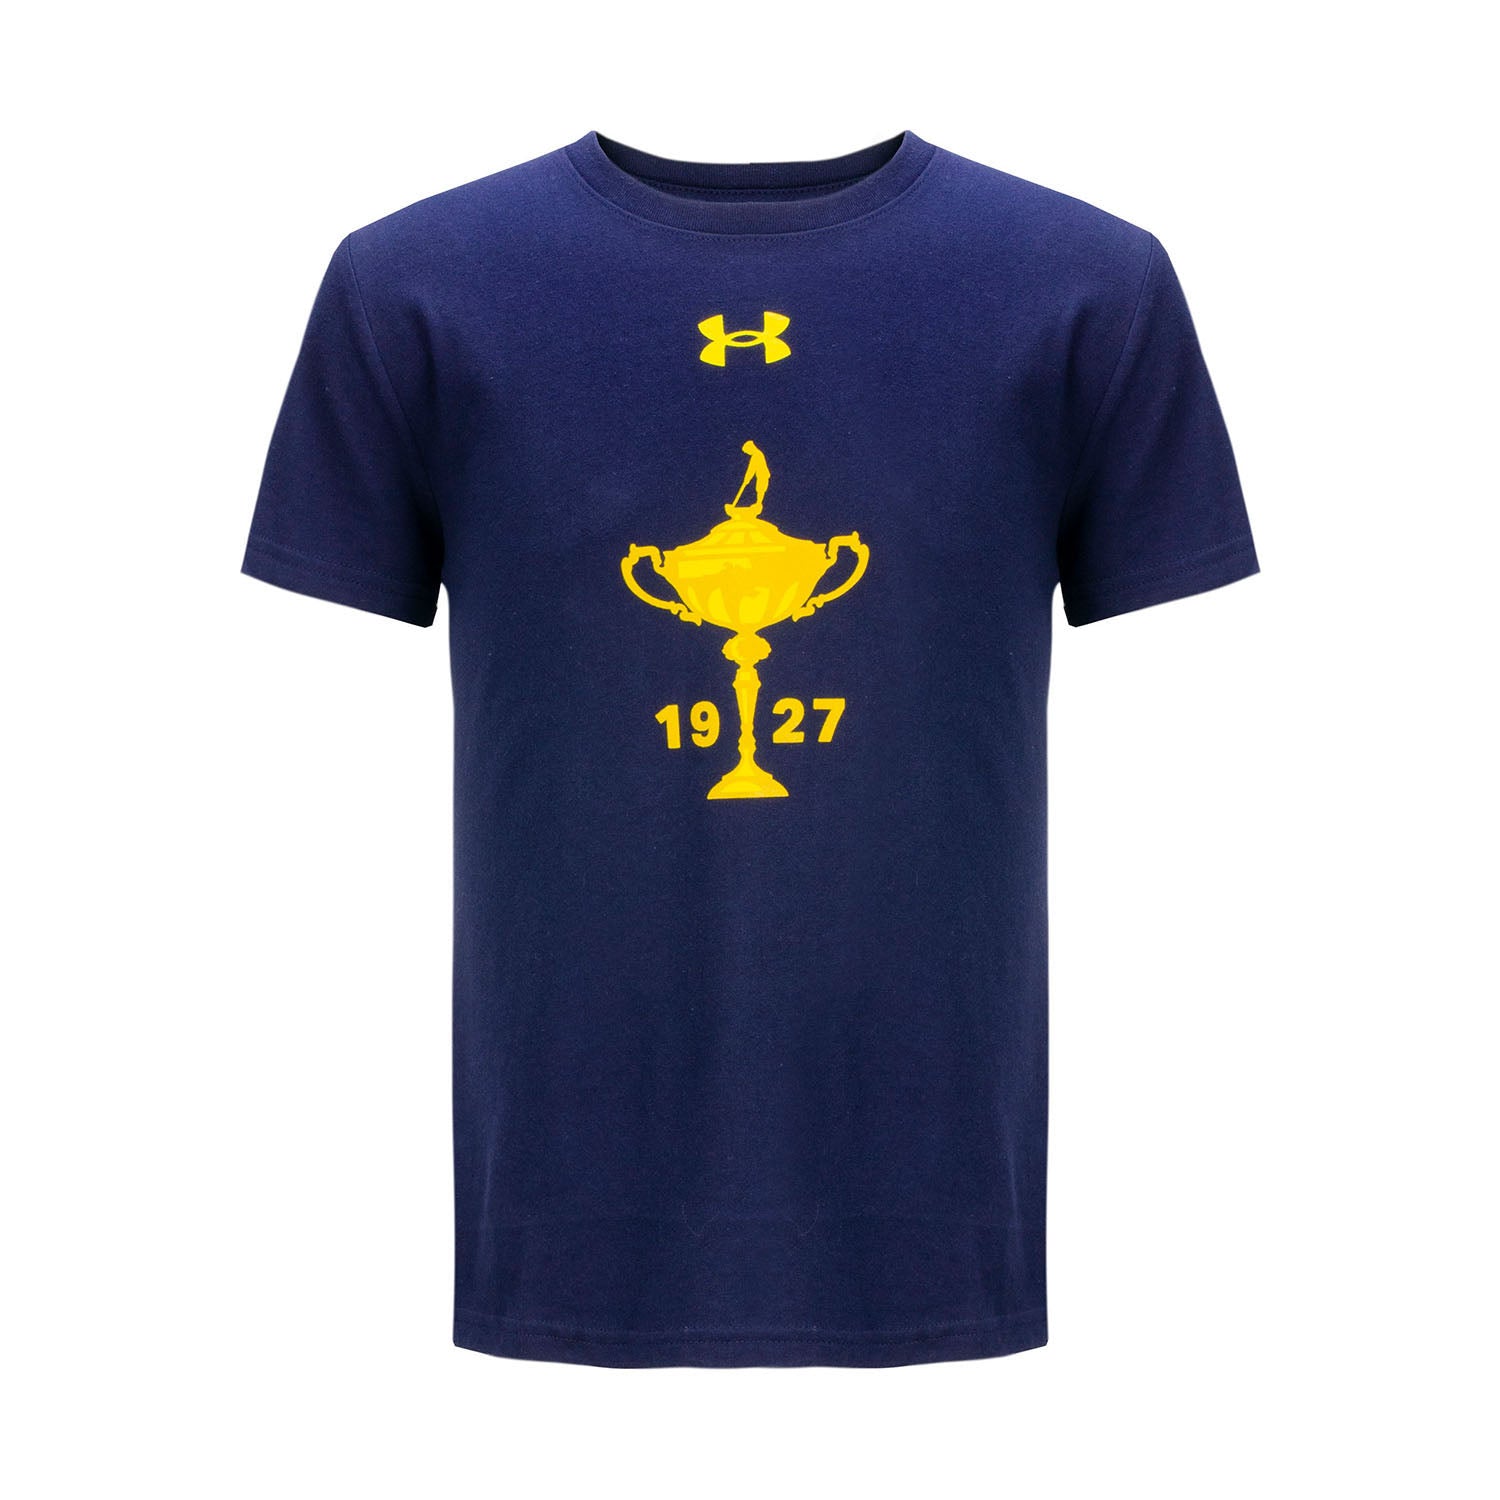 Boys Performance Cotton SS Tee - Navy -Front View